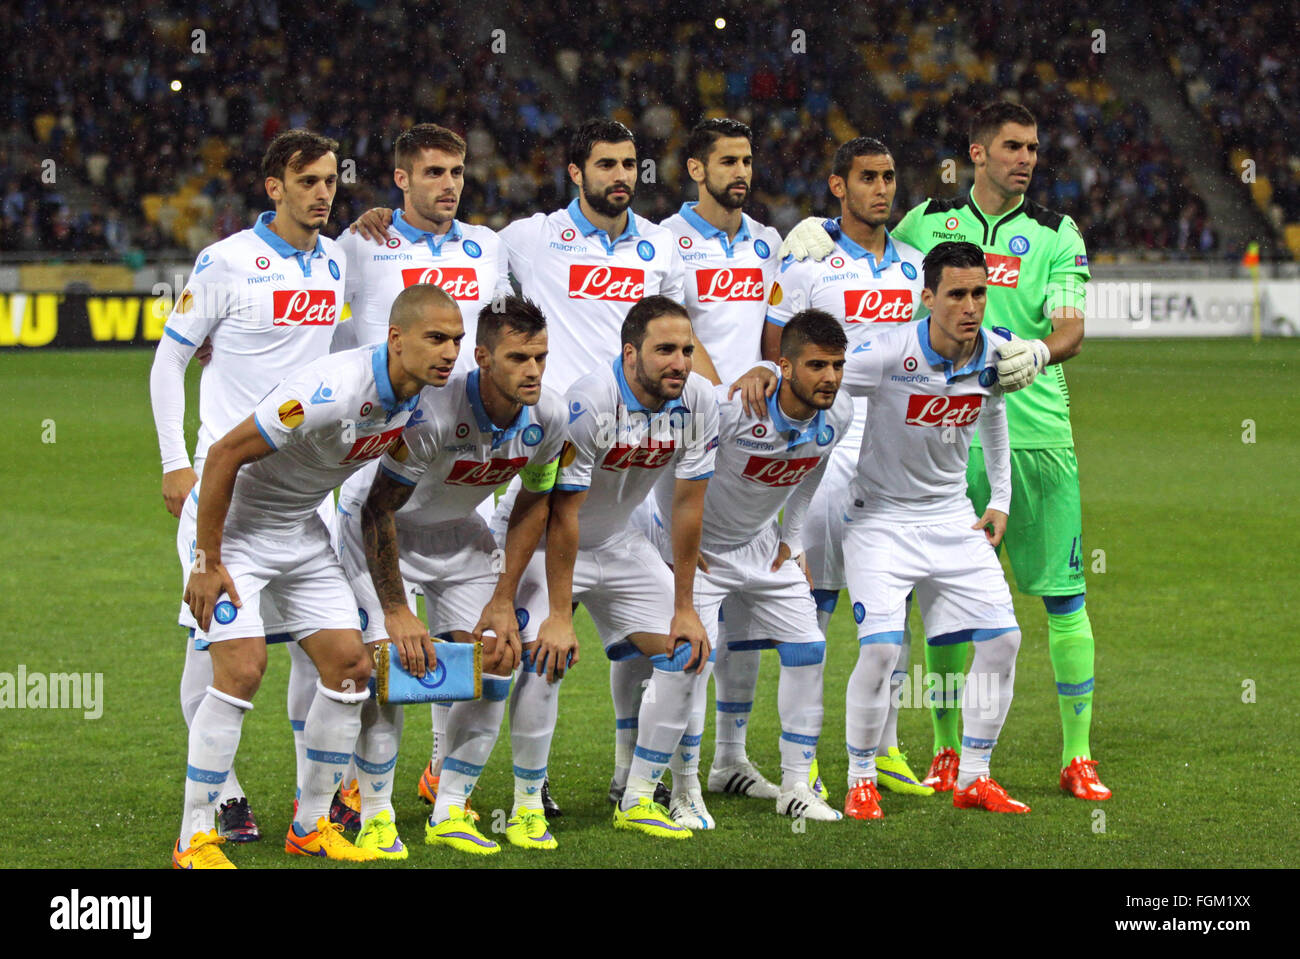 KYIV, UKRAINE - MAY 14, 2015: Players of SSC Napoli team pose for a group photo before UEFA Europa League semifinal game against Stock Photo